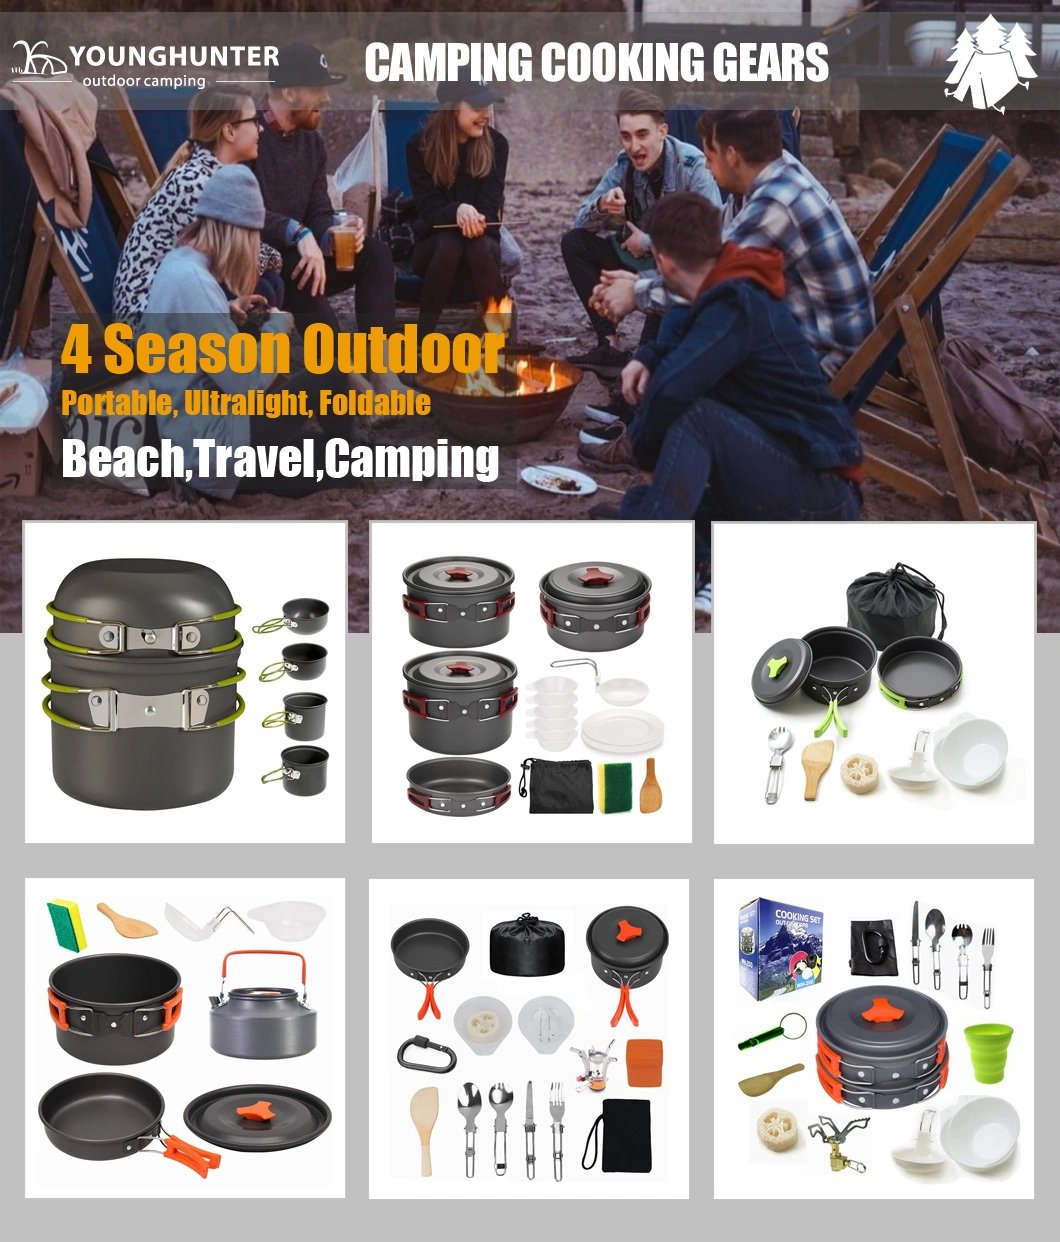 High Quality Aluminium Non Stick Lightweight for 1-2 Person Uoutdoor Hiking Camping Cookware